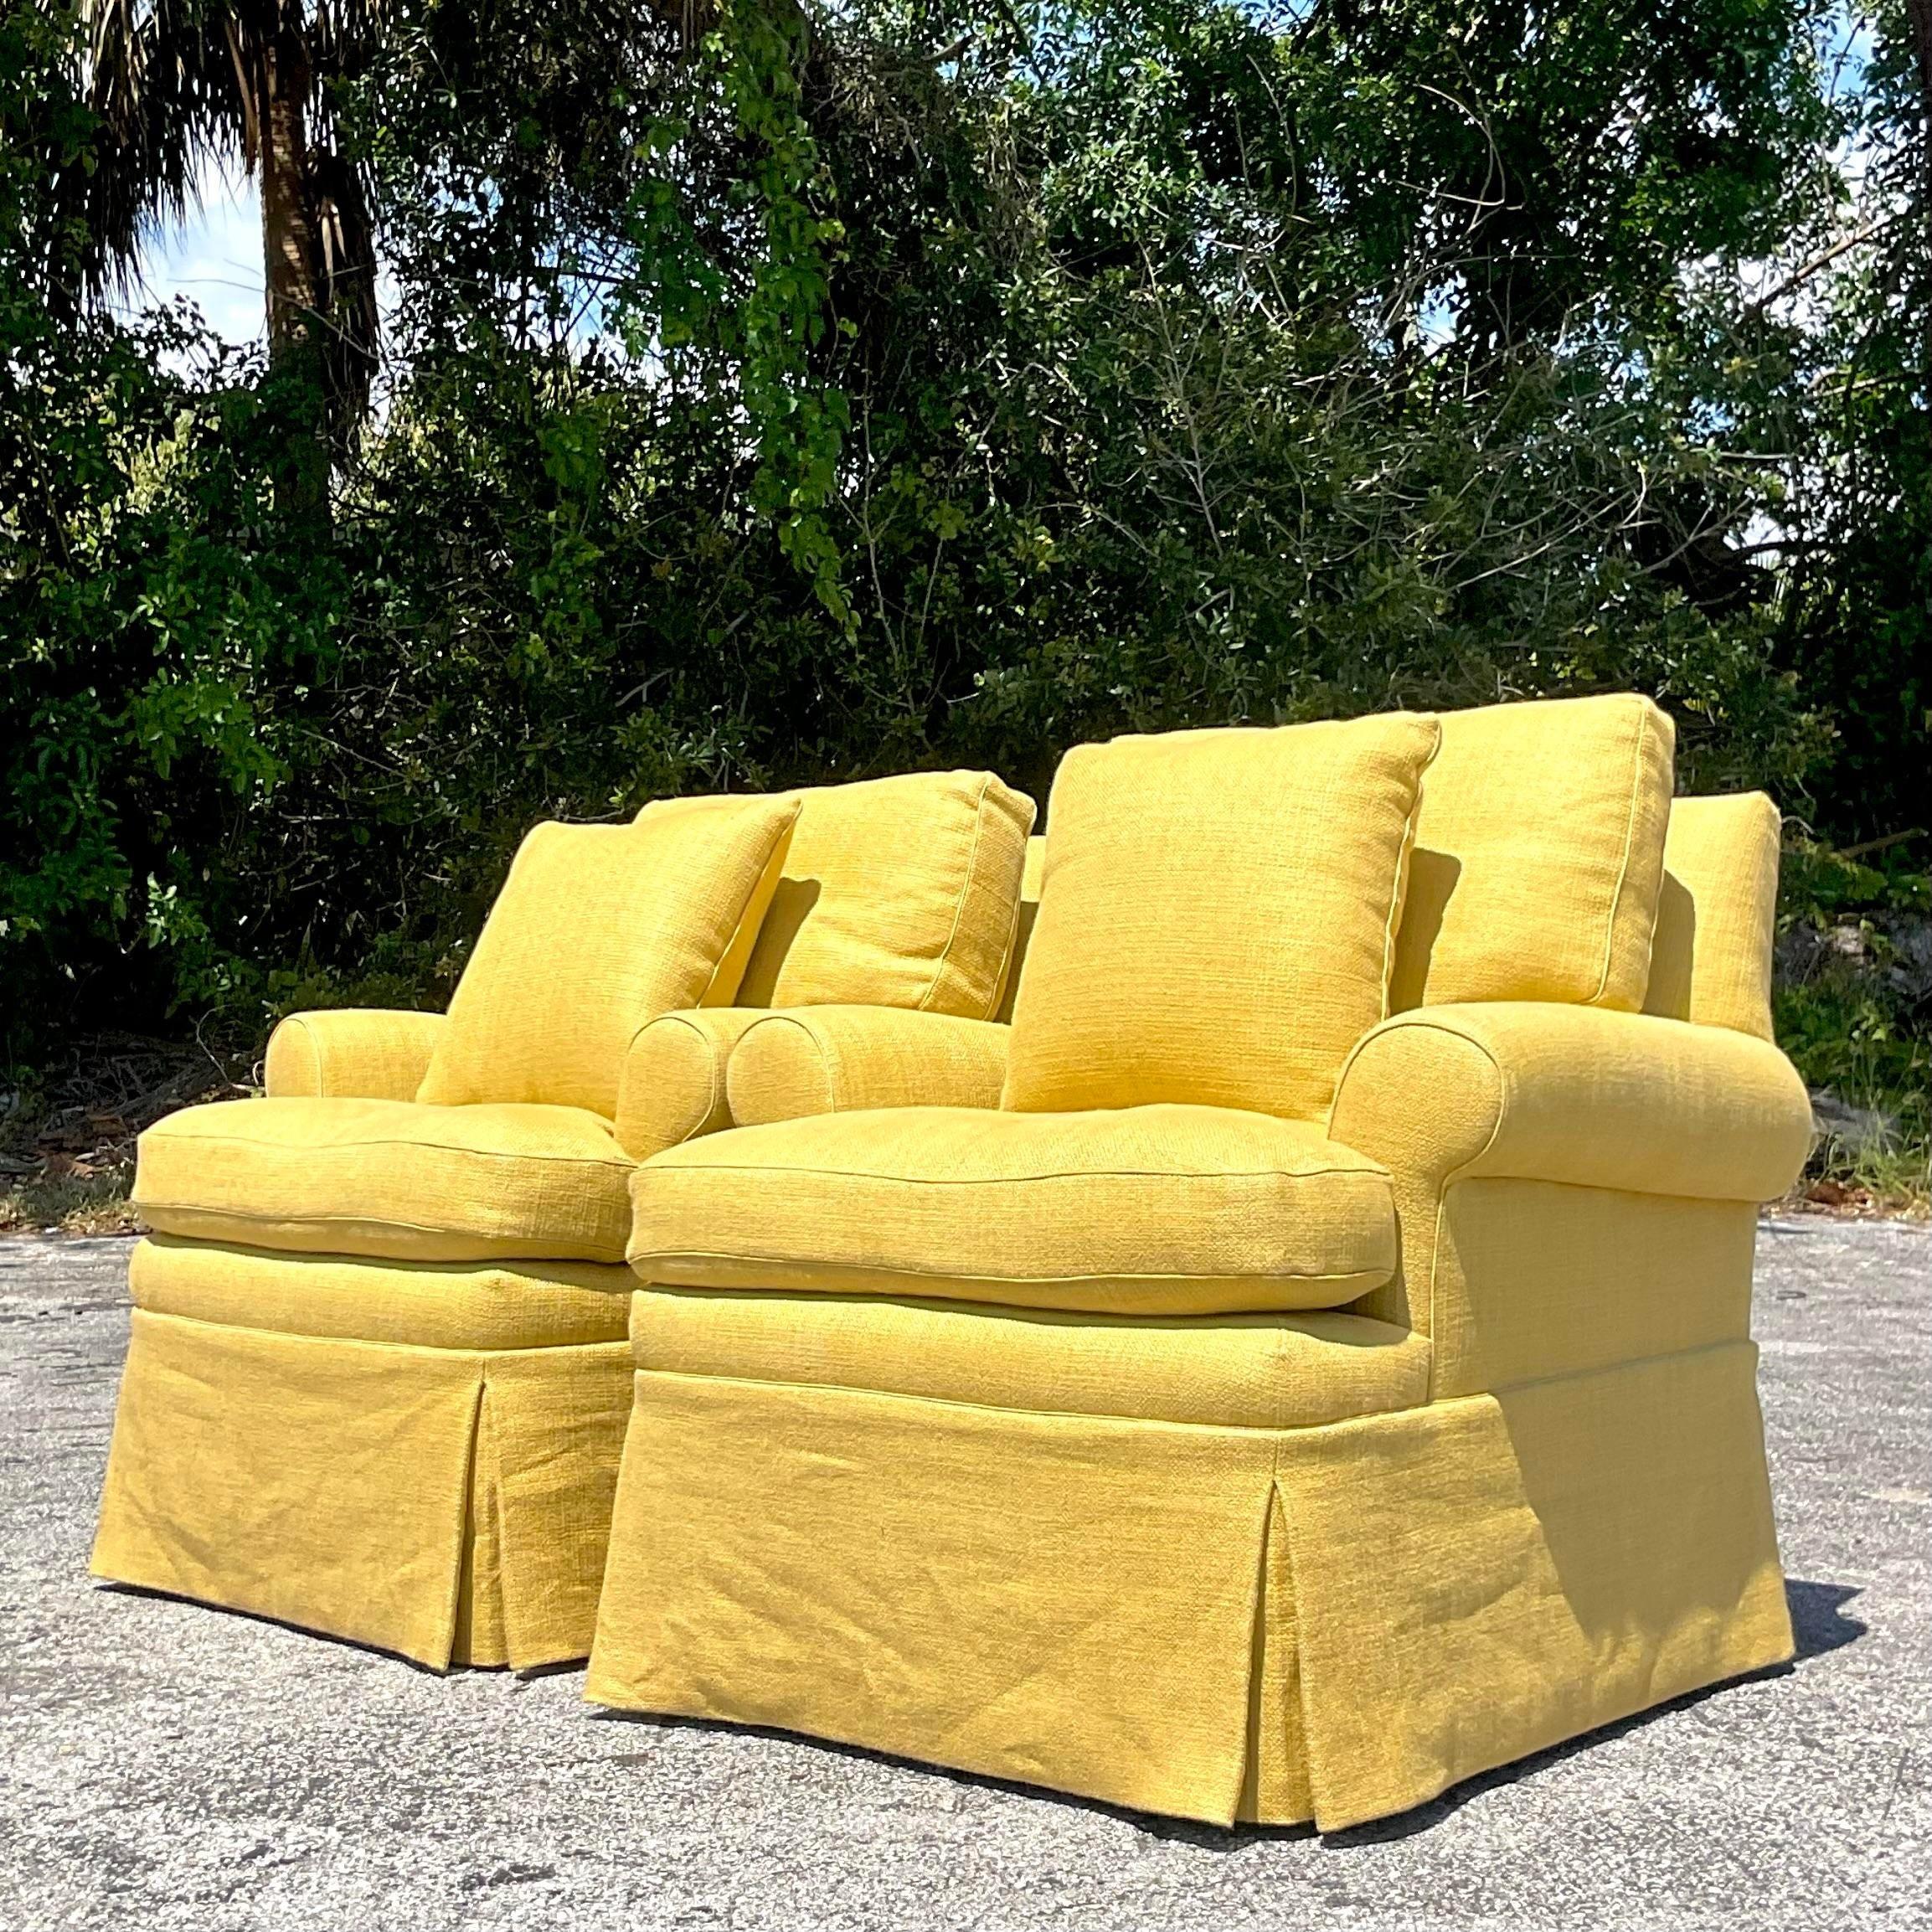 Introduce a pop of color and elegance with this pair of vintage Regency chartreuse lounge chairs. American-crafted with timeless style, these chairs offer both comfort and sophistication, making them a standout addition to any contemporary or